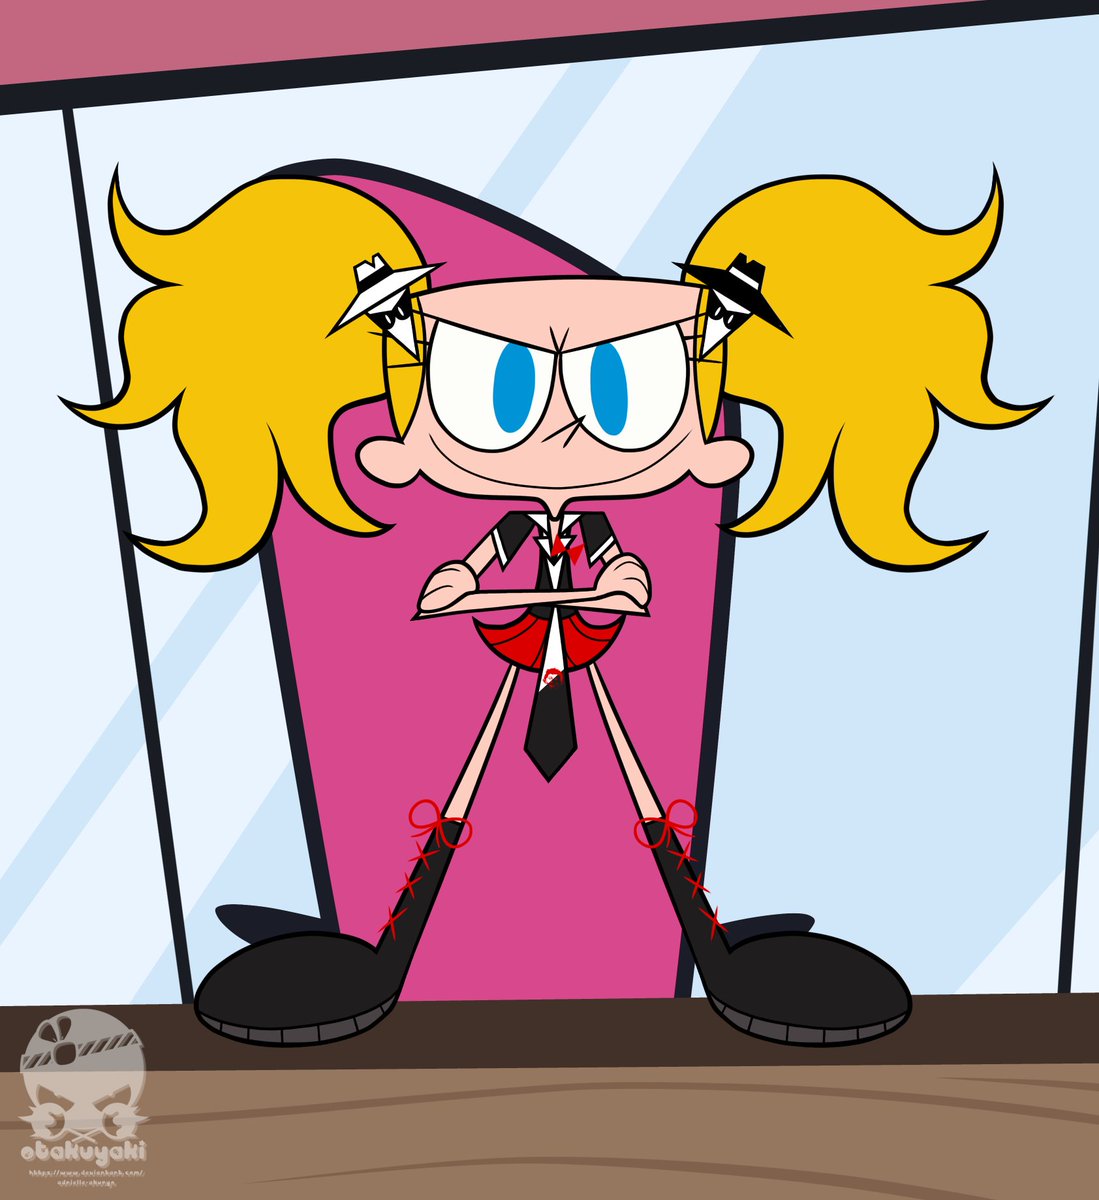 'I had to get rid of you guys in order to make room for new shows on Cartoon Network, like MAD!'

Here is Dee Dee Enoshima. 🩰🤍🖤🚫
---
#CartoonNetwork #dexterslaboratory #MAD #MADParody #danganronpa